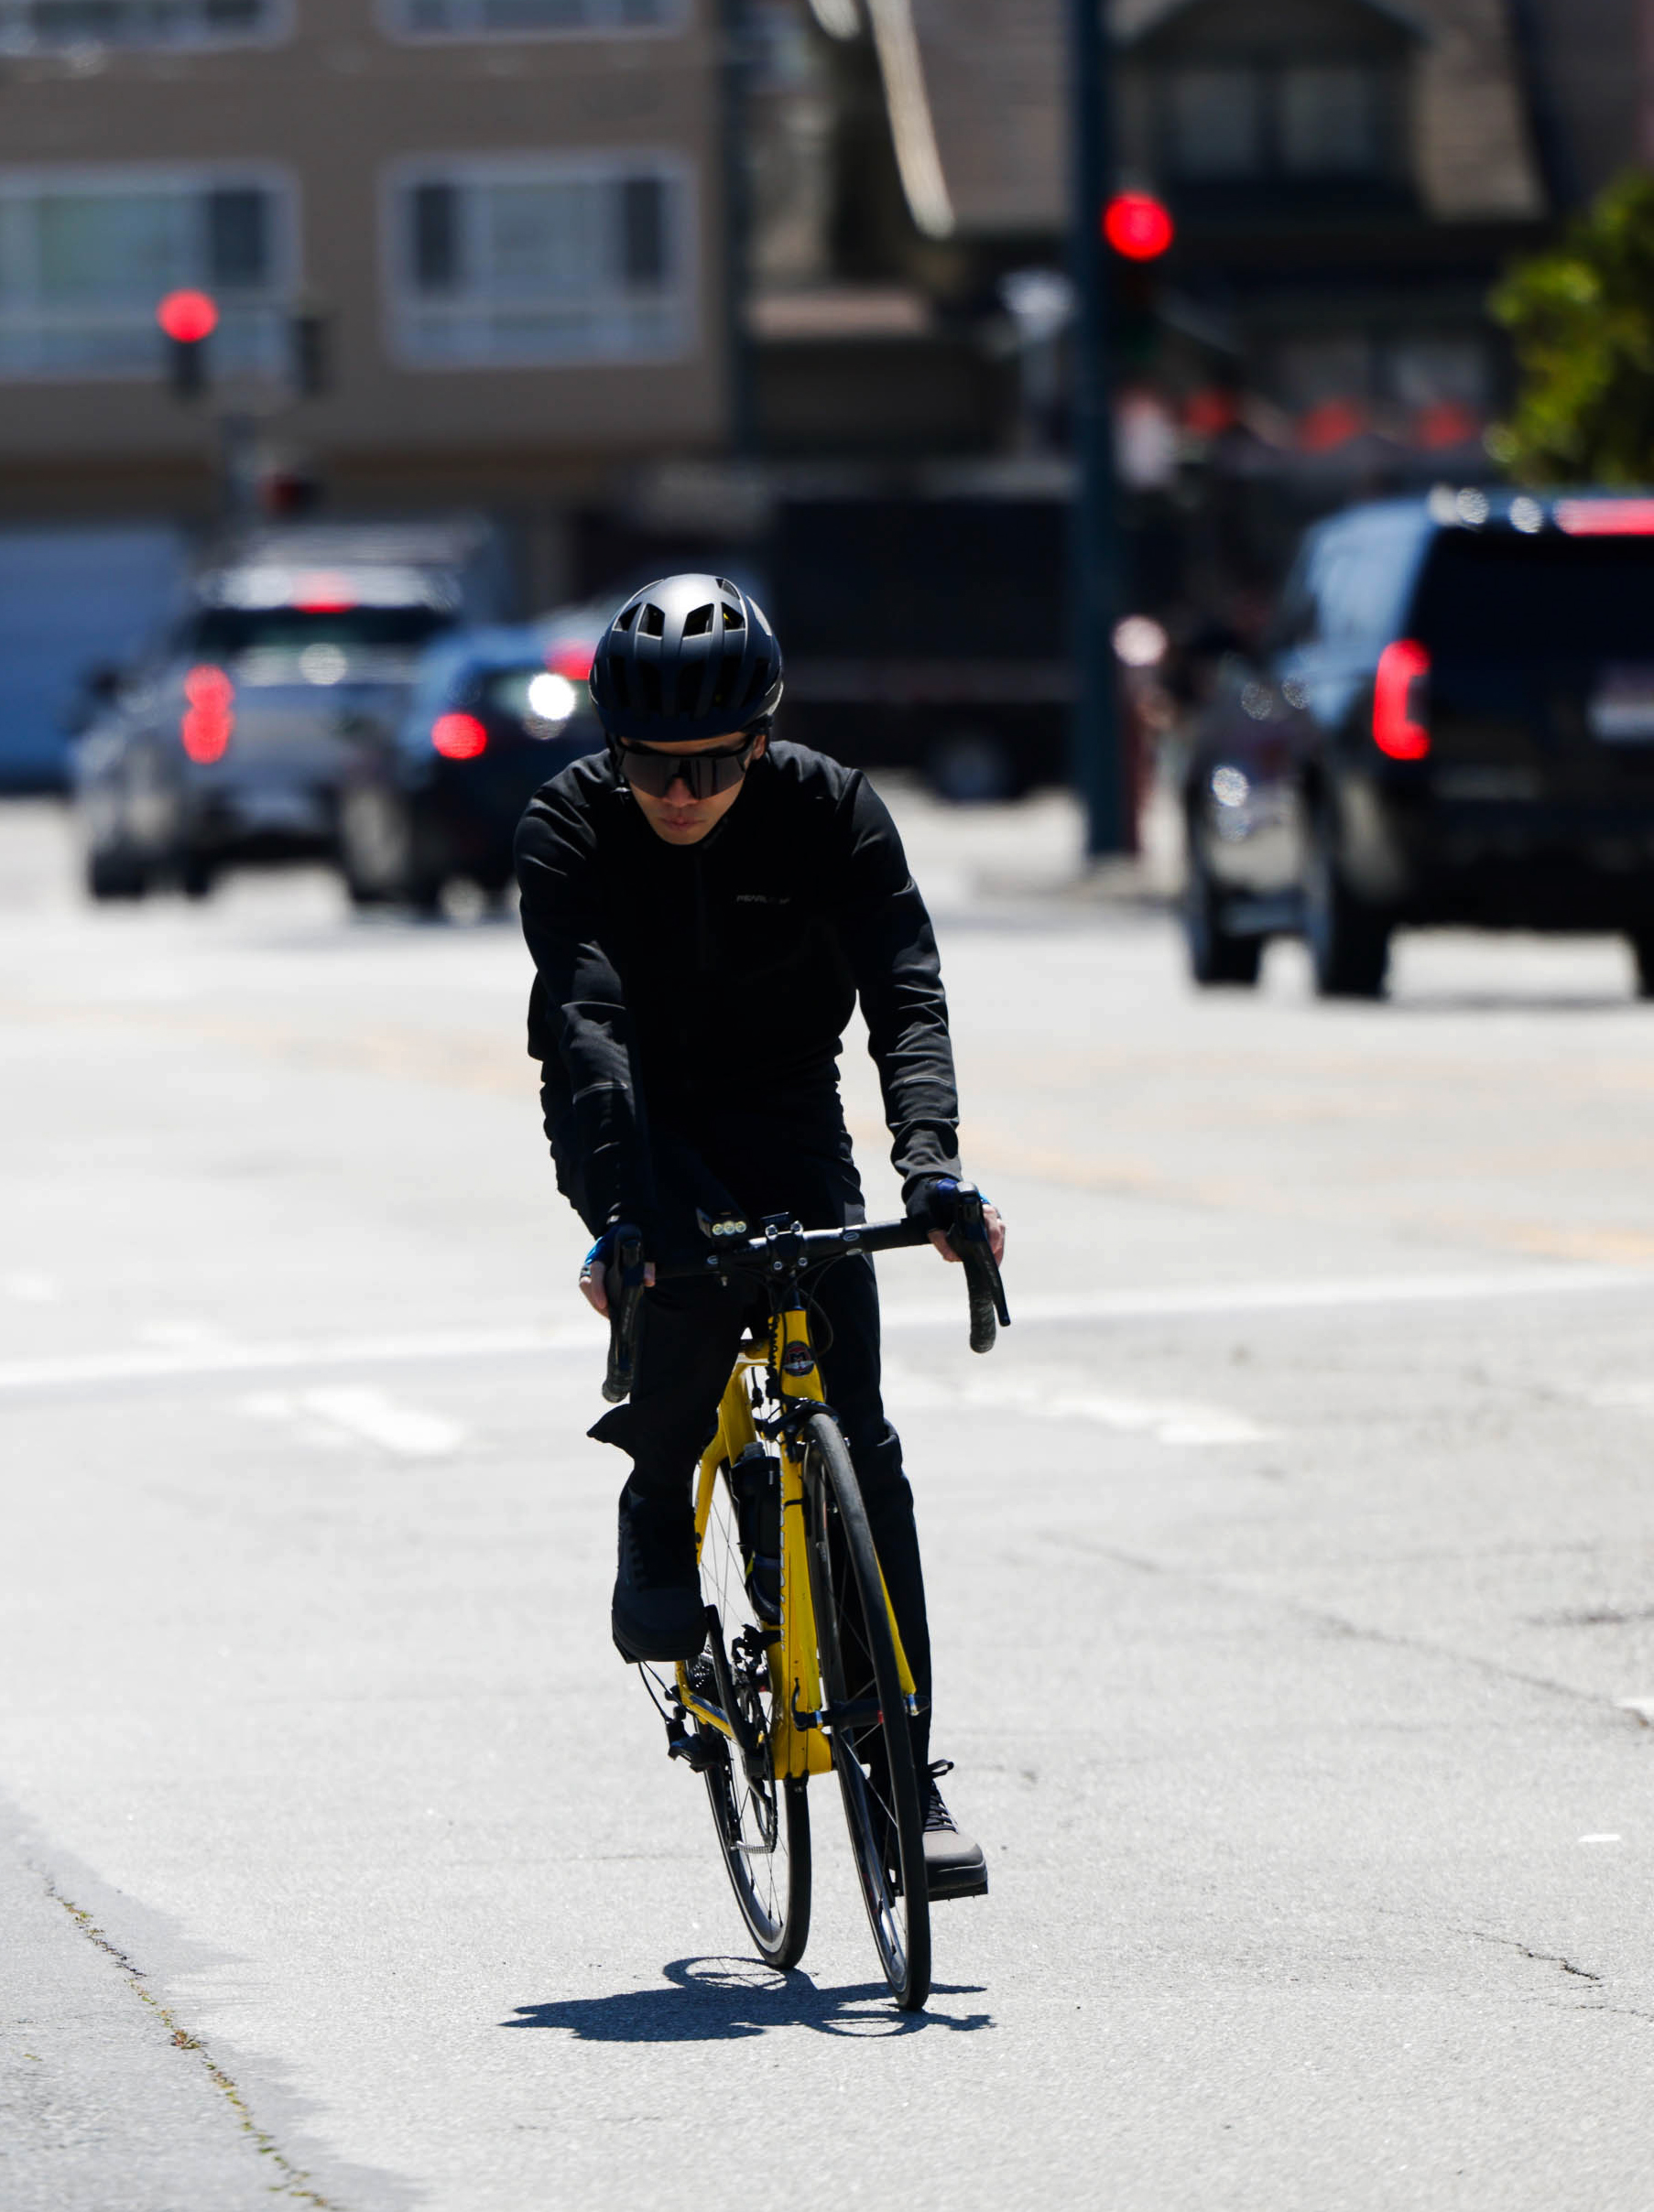 A cyclist in black attire rides a yellow bike on a sunny street, vehicles and traffic lights behind.